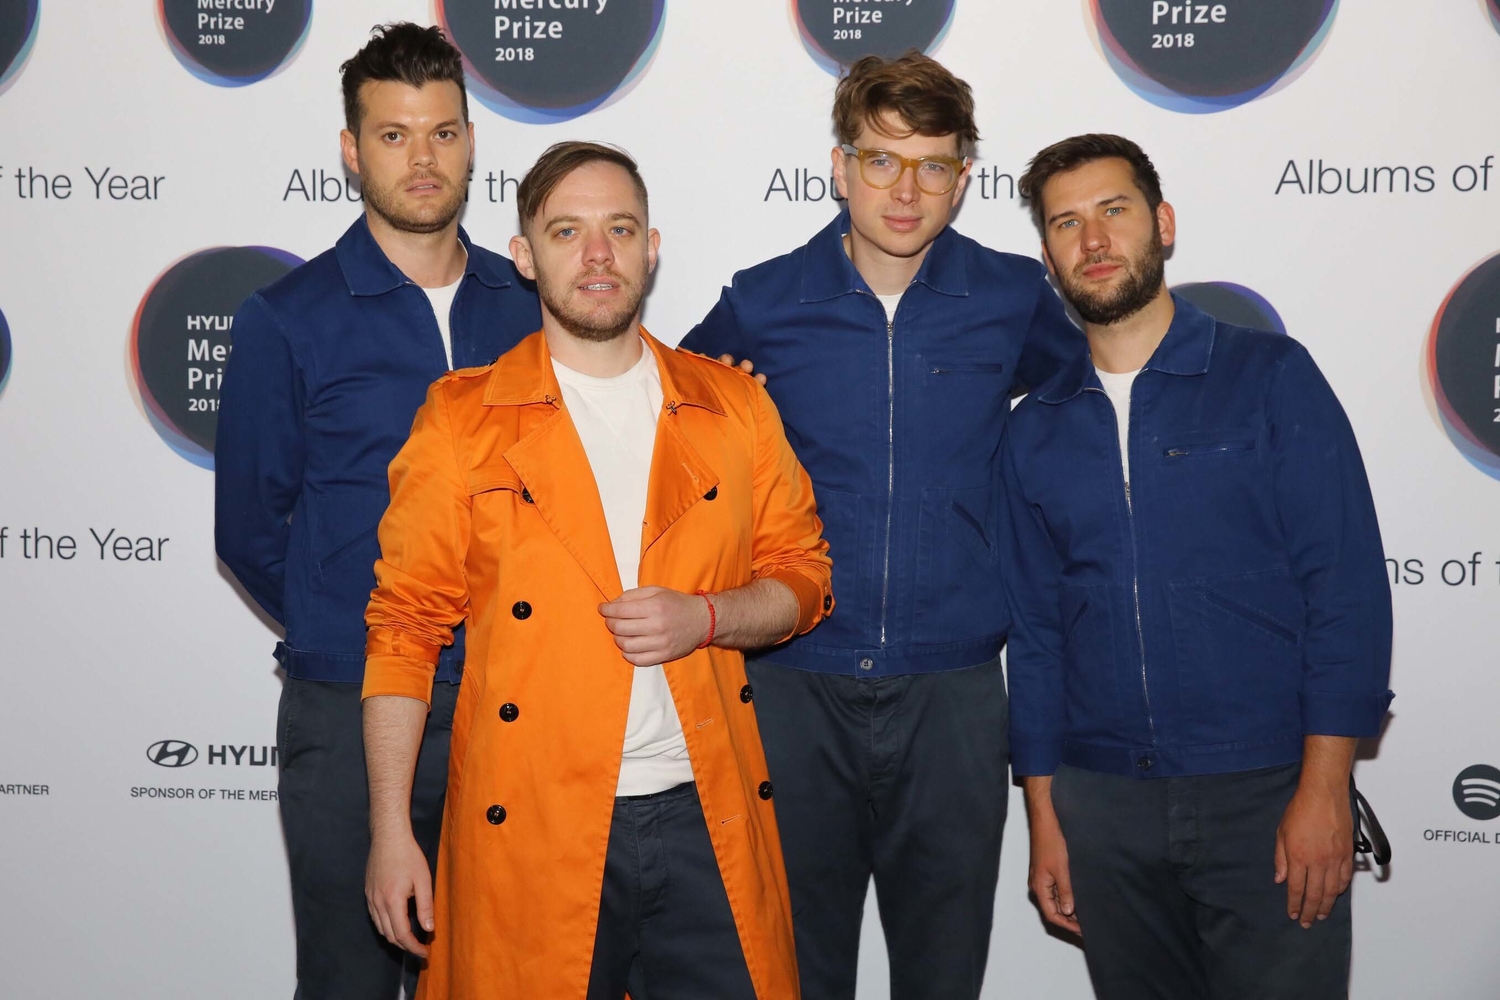 Everything Everything gear up for the 2018 Hyundai Mercury Prize: “We wanted to make a bit of a statement tonight”